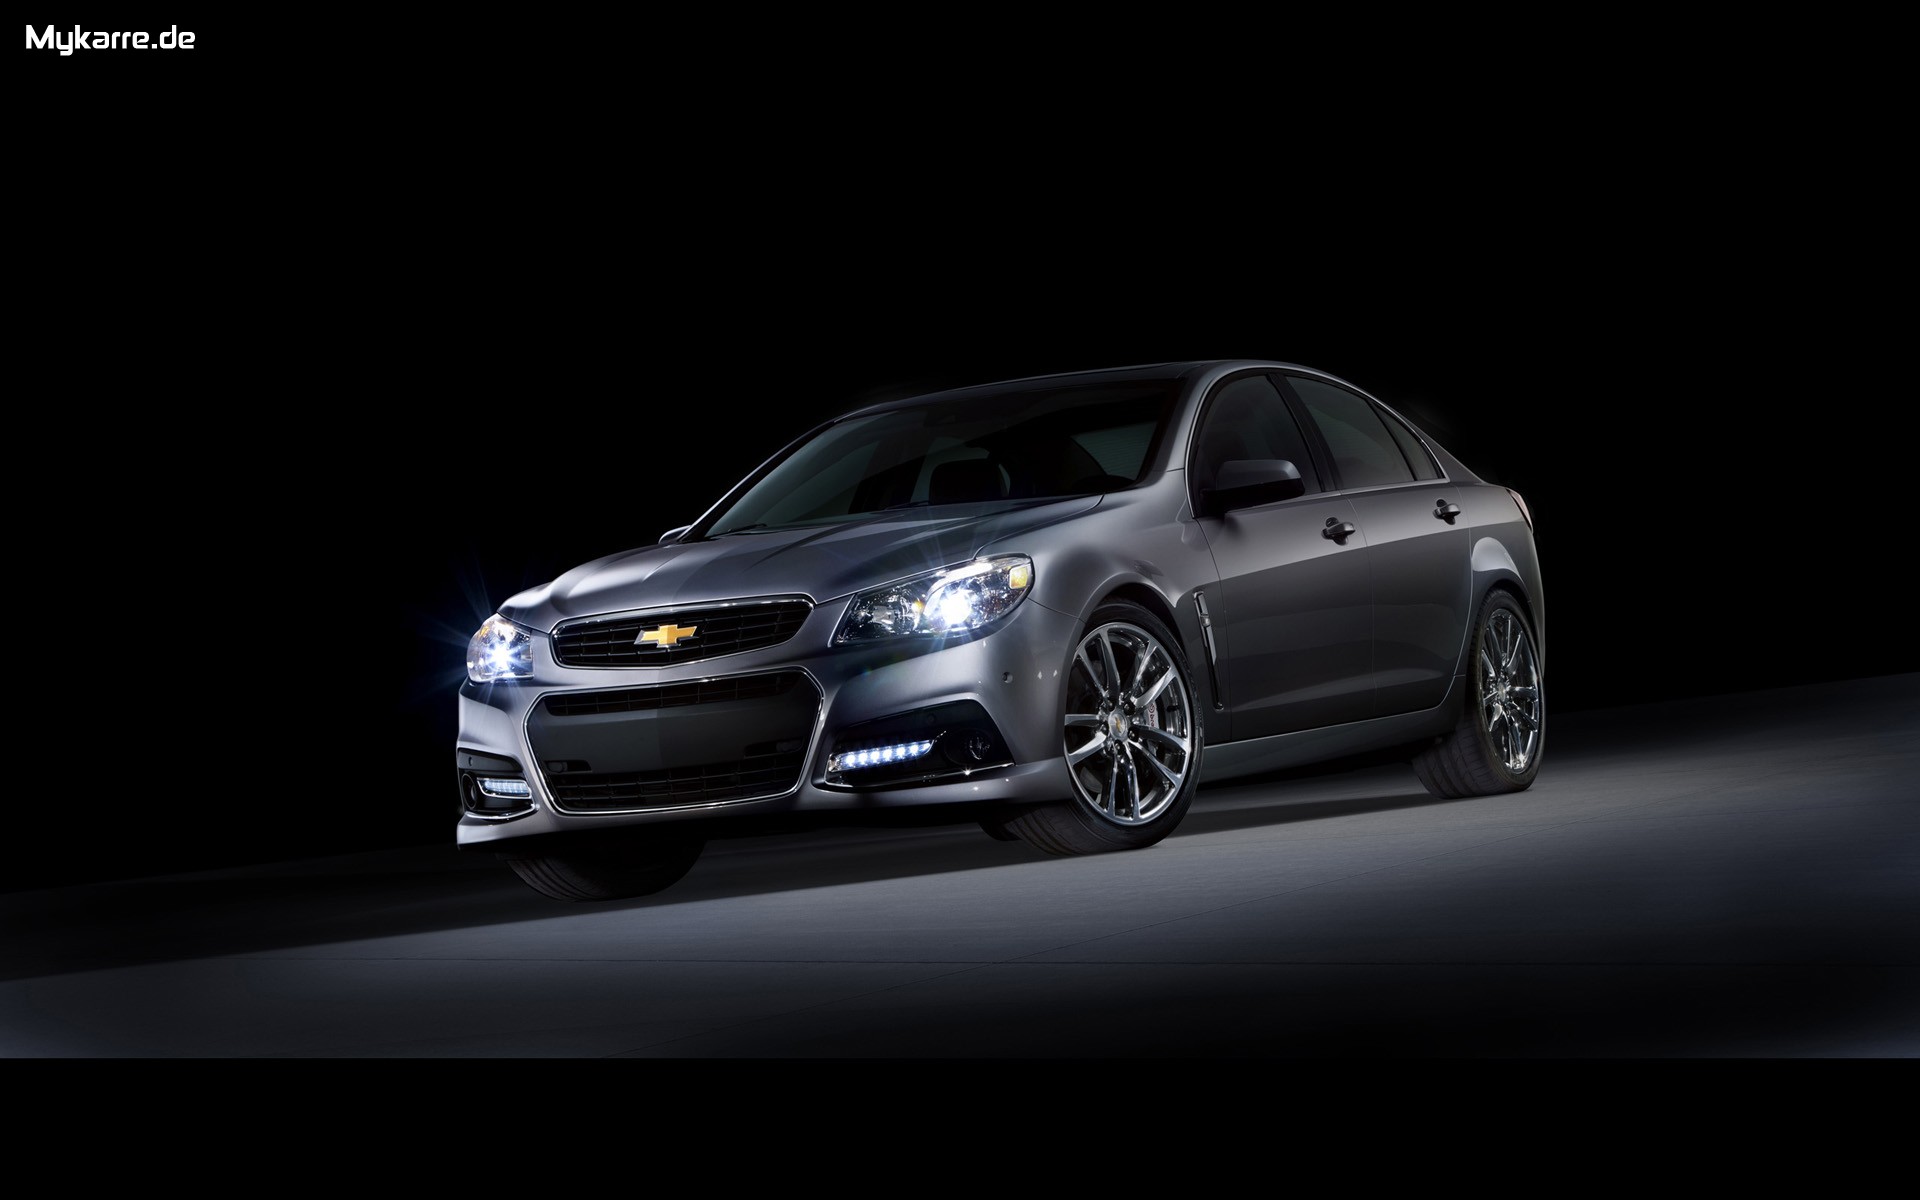 Chevrolet SS 2014 Wallpaper Frontansicht Auto Tuning News   Tuning 1920x1200